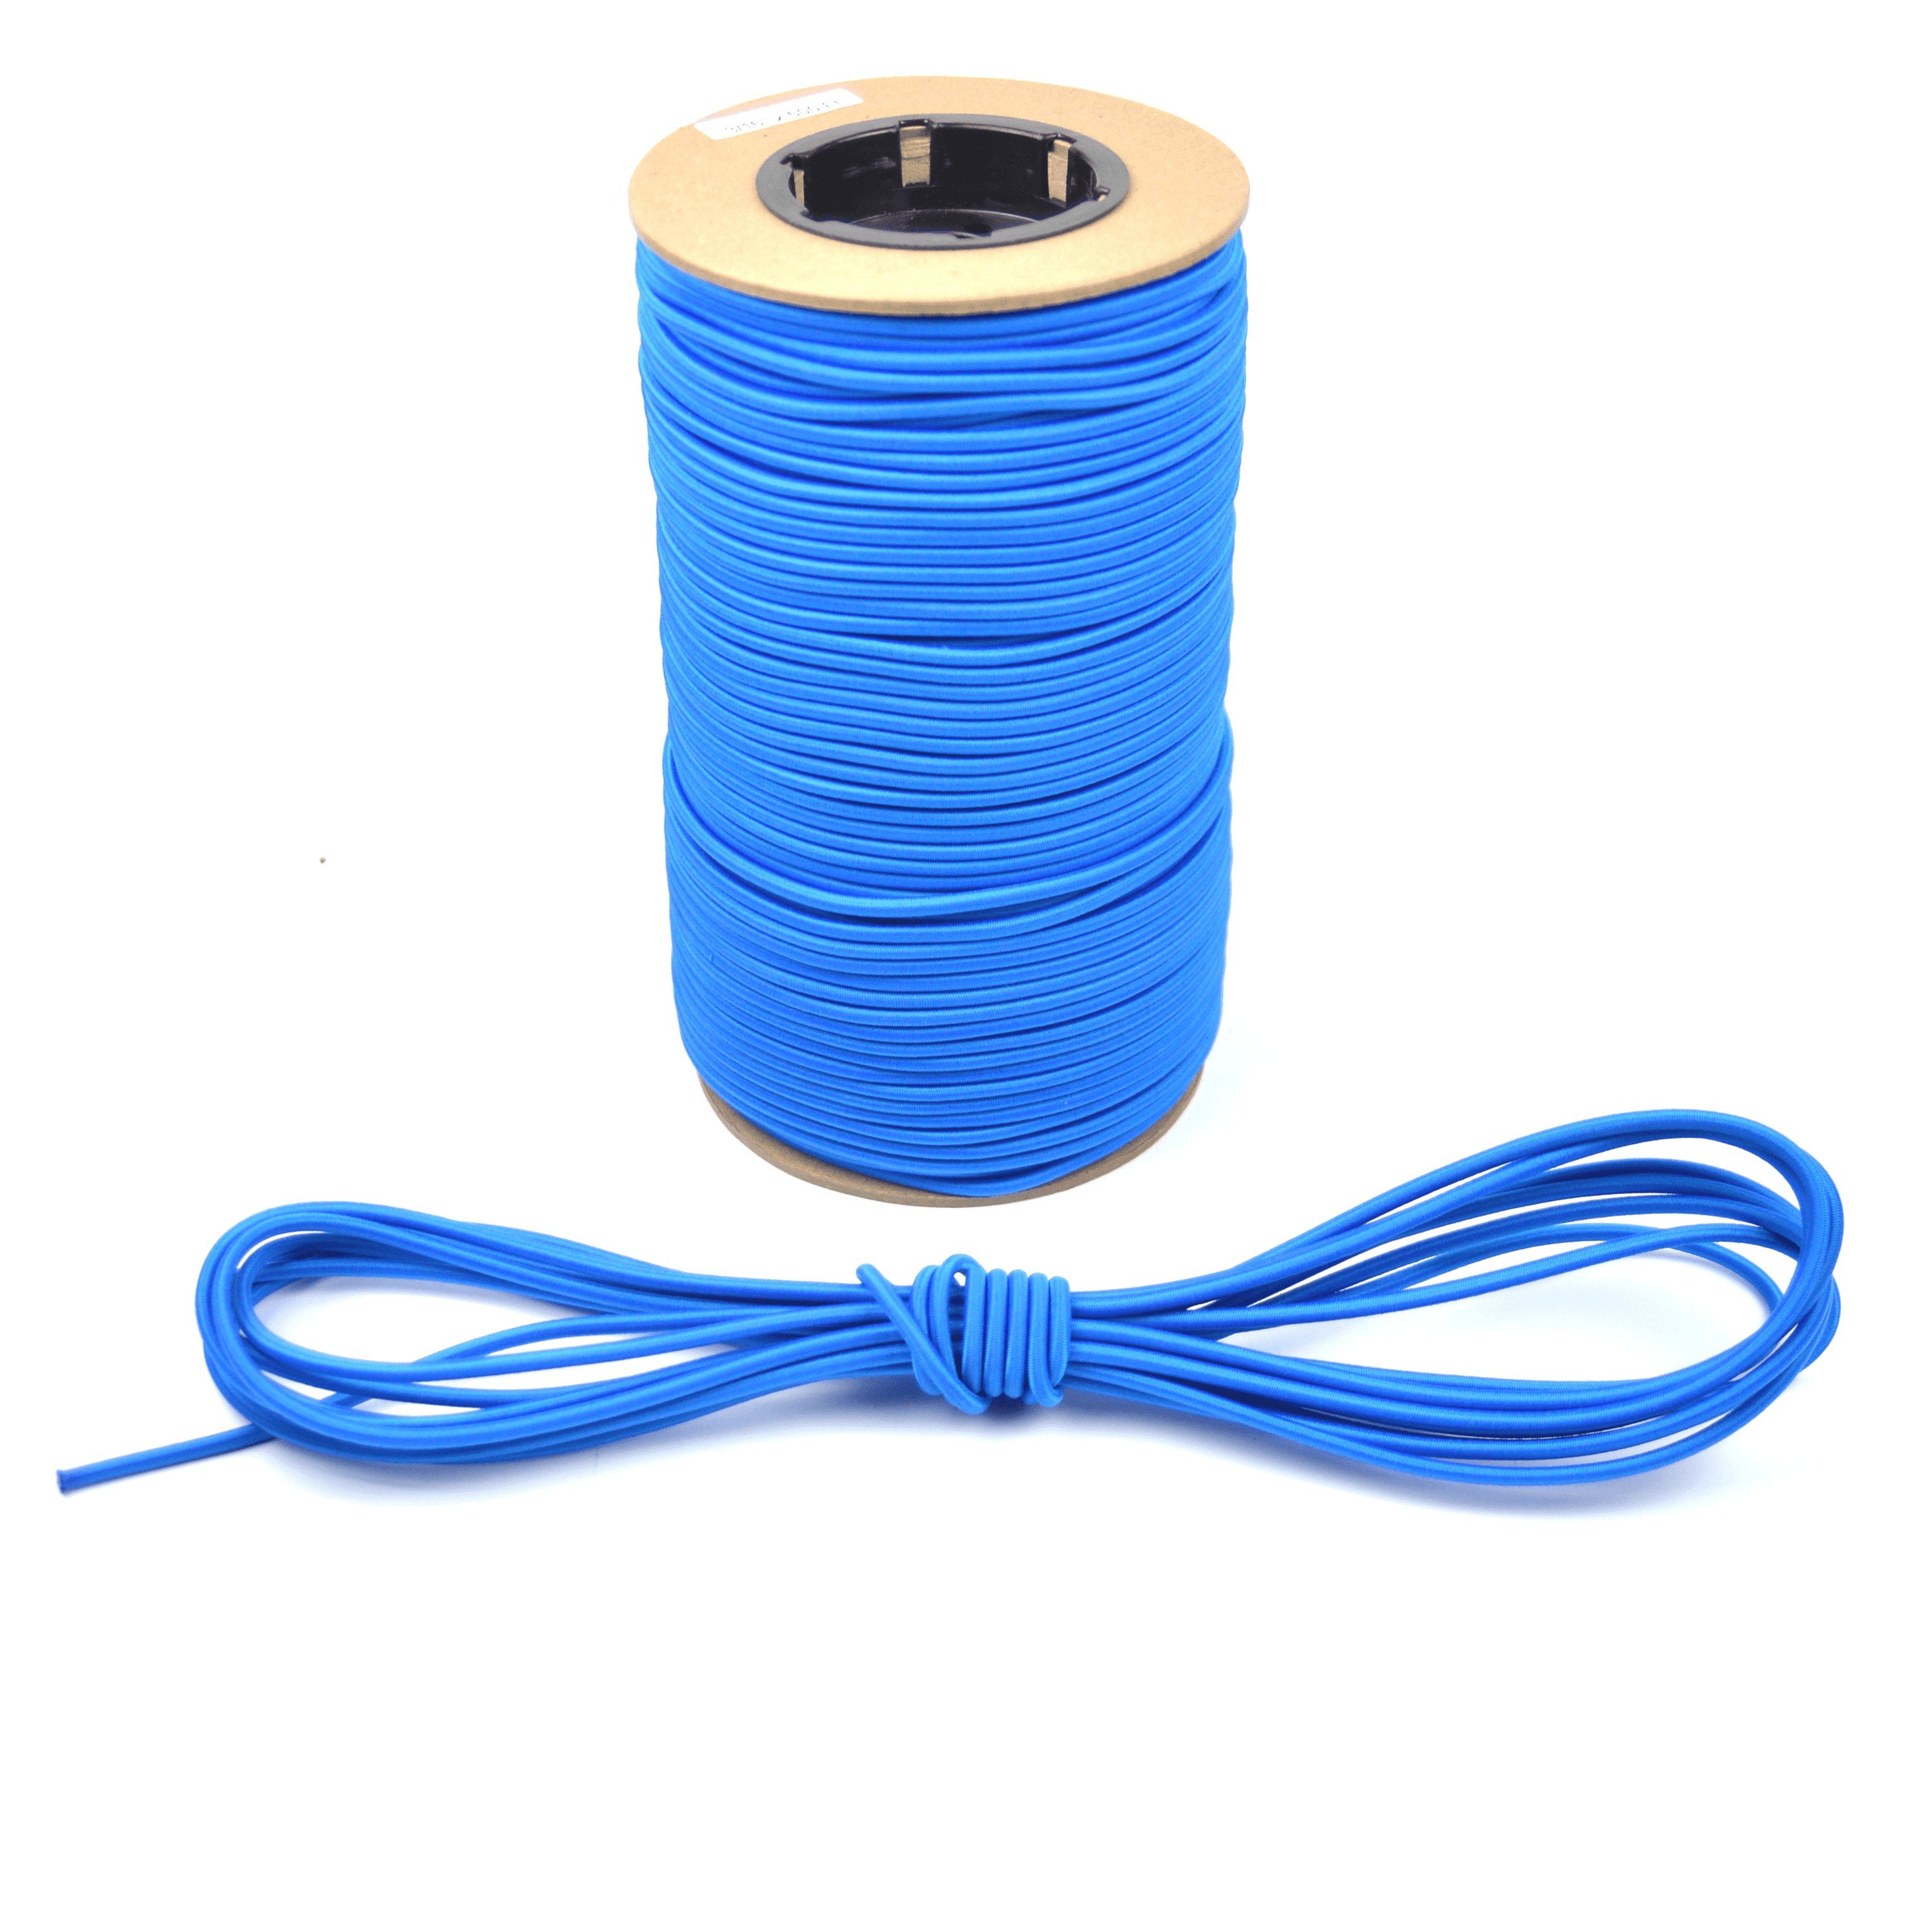 100 1000 Feet Options 25 50 250 PARACORD PLANET 1/16” Diameter Elastic Stretch Bungee Shock Cord in 10 